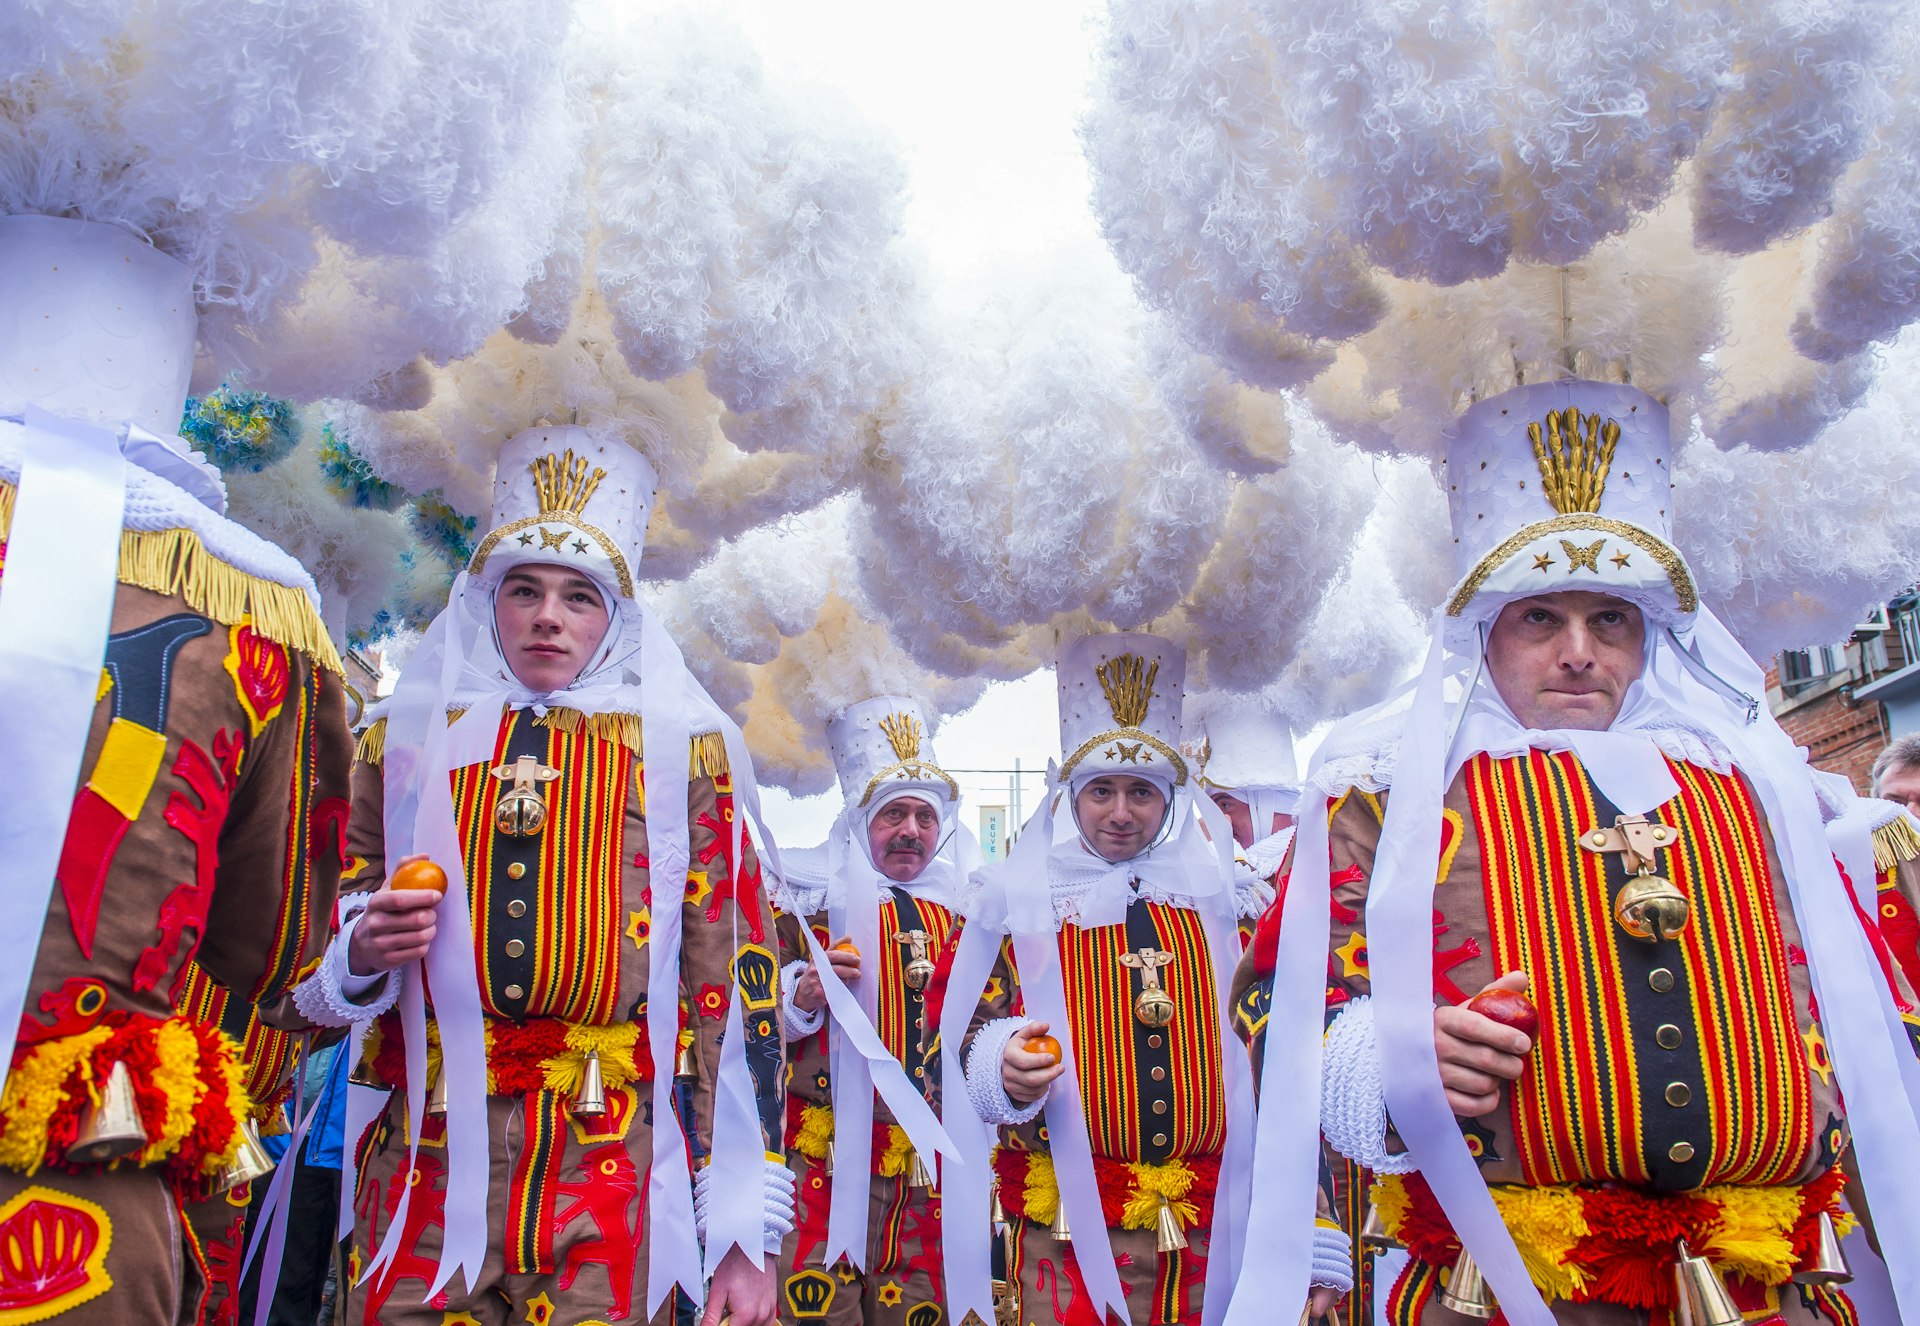 Men in flamboyant costumes march in a parade at a carnival